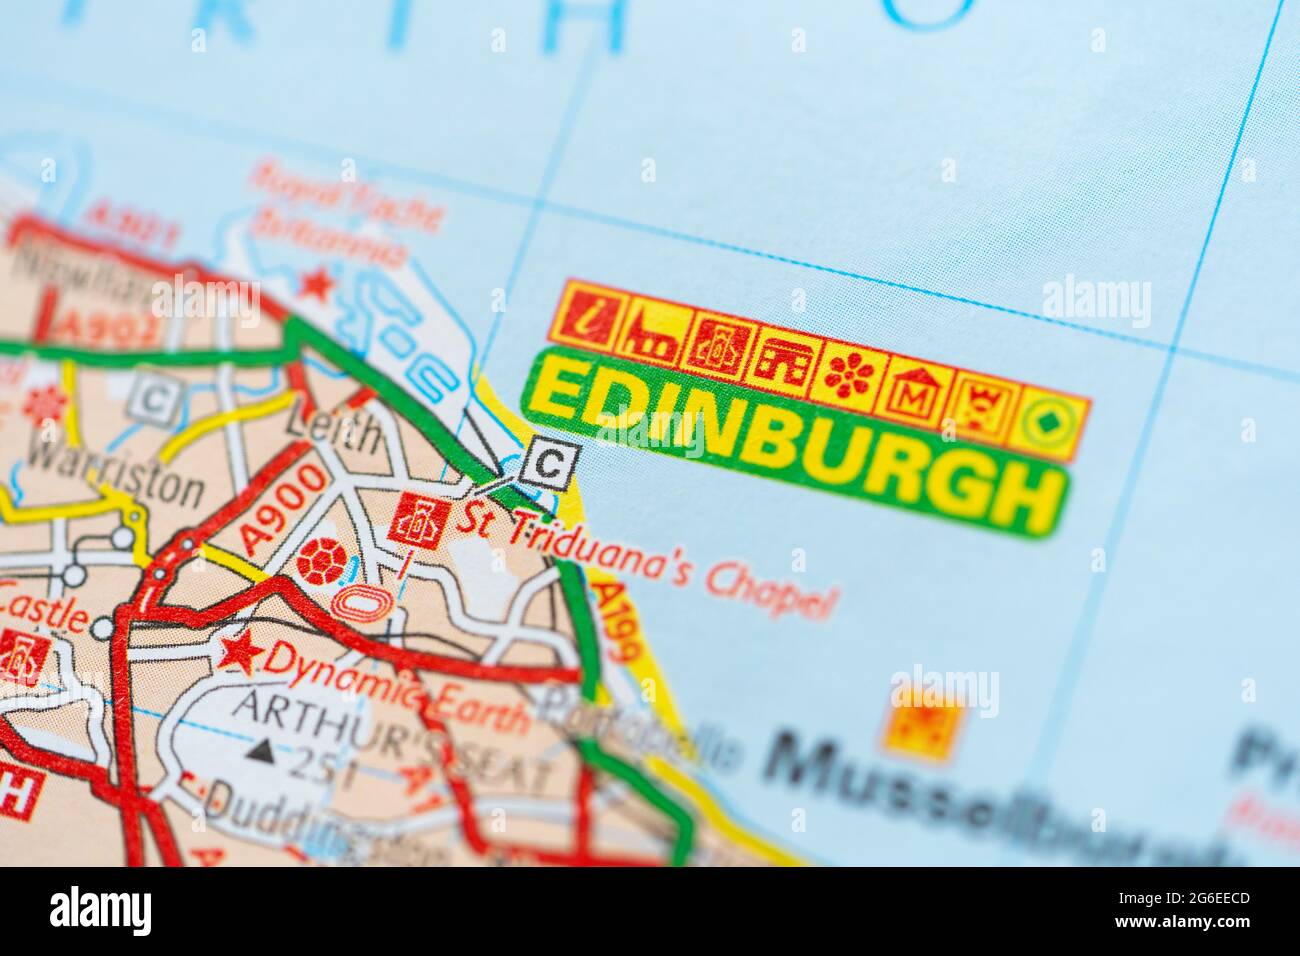 A macro closeup of a page in a printed road map atlas showing the capital city of Scotland - Edinburgh Stock Photo